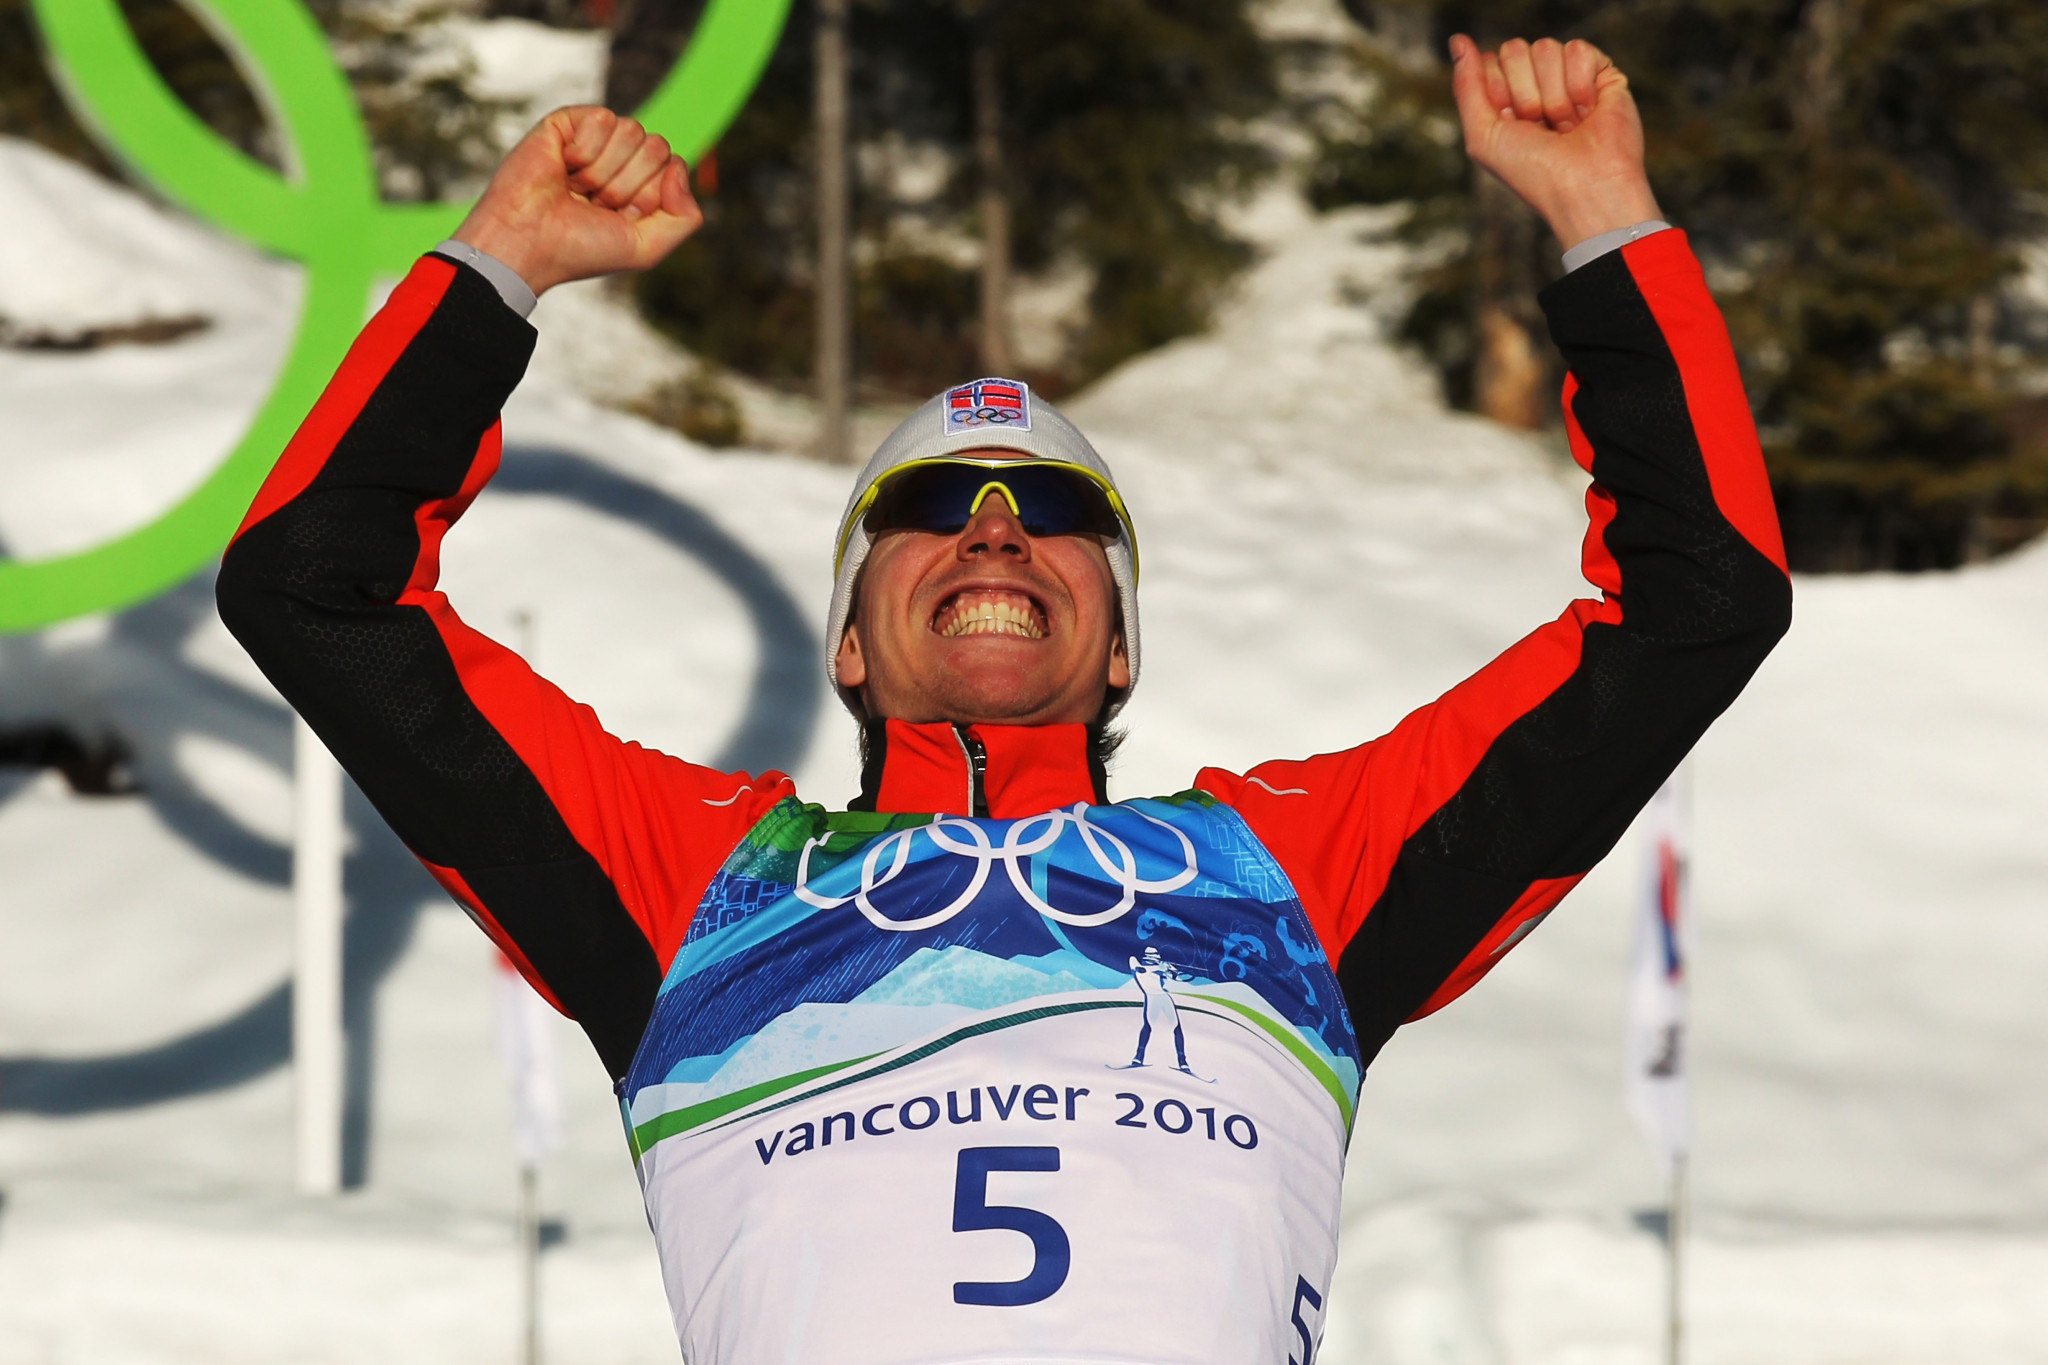 Emile Hegle Svendsen won his first Olympic title at Vancouver 2010 ©Getty Images